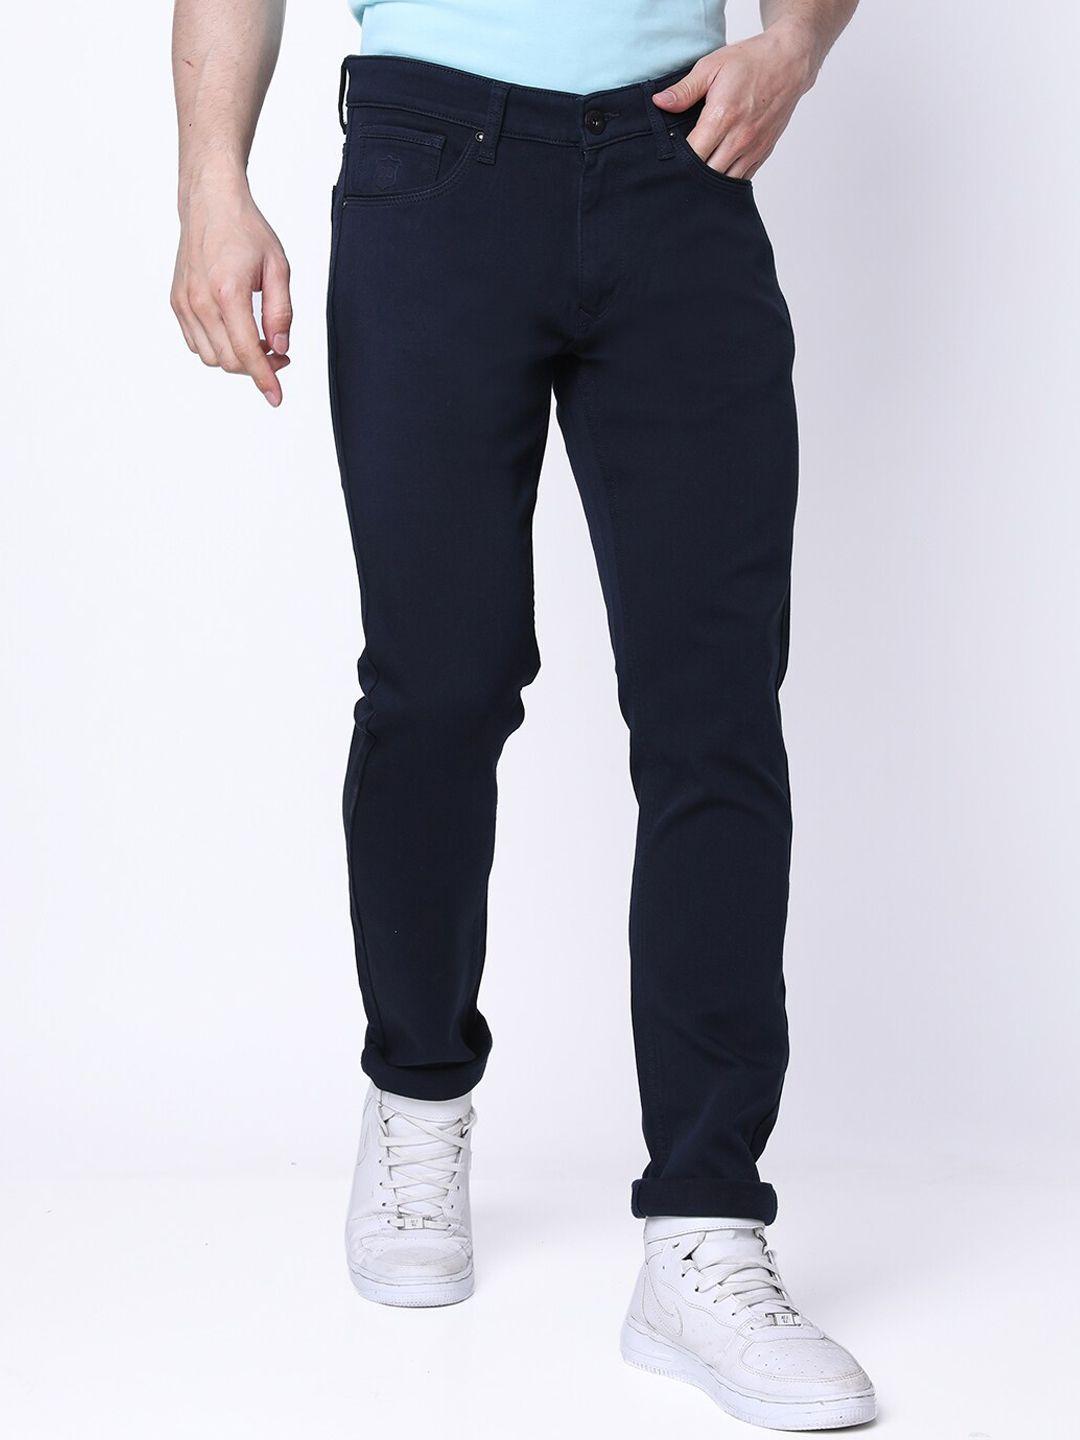 oxemberg lean men slim fit mid-rise clean look stretchable jeans